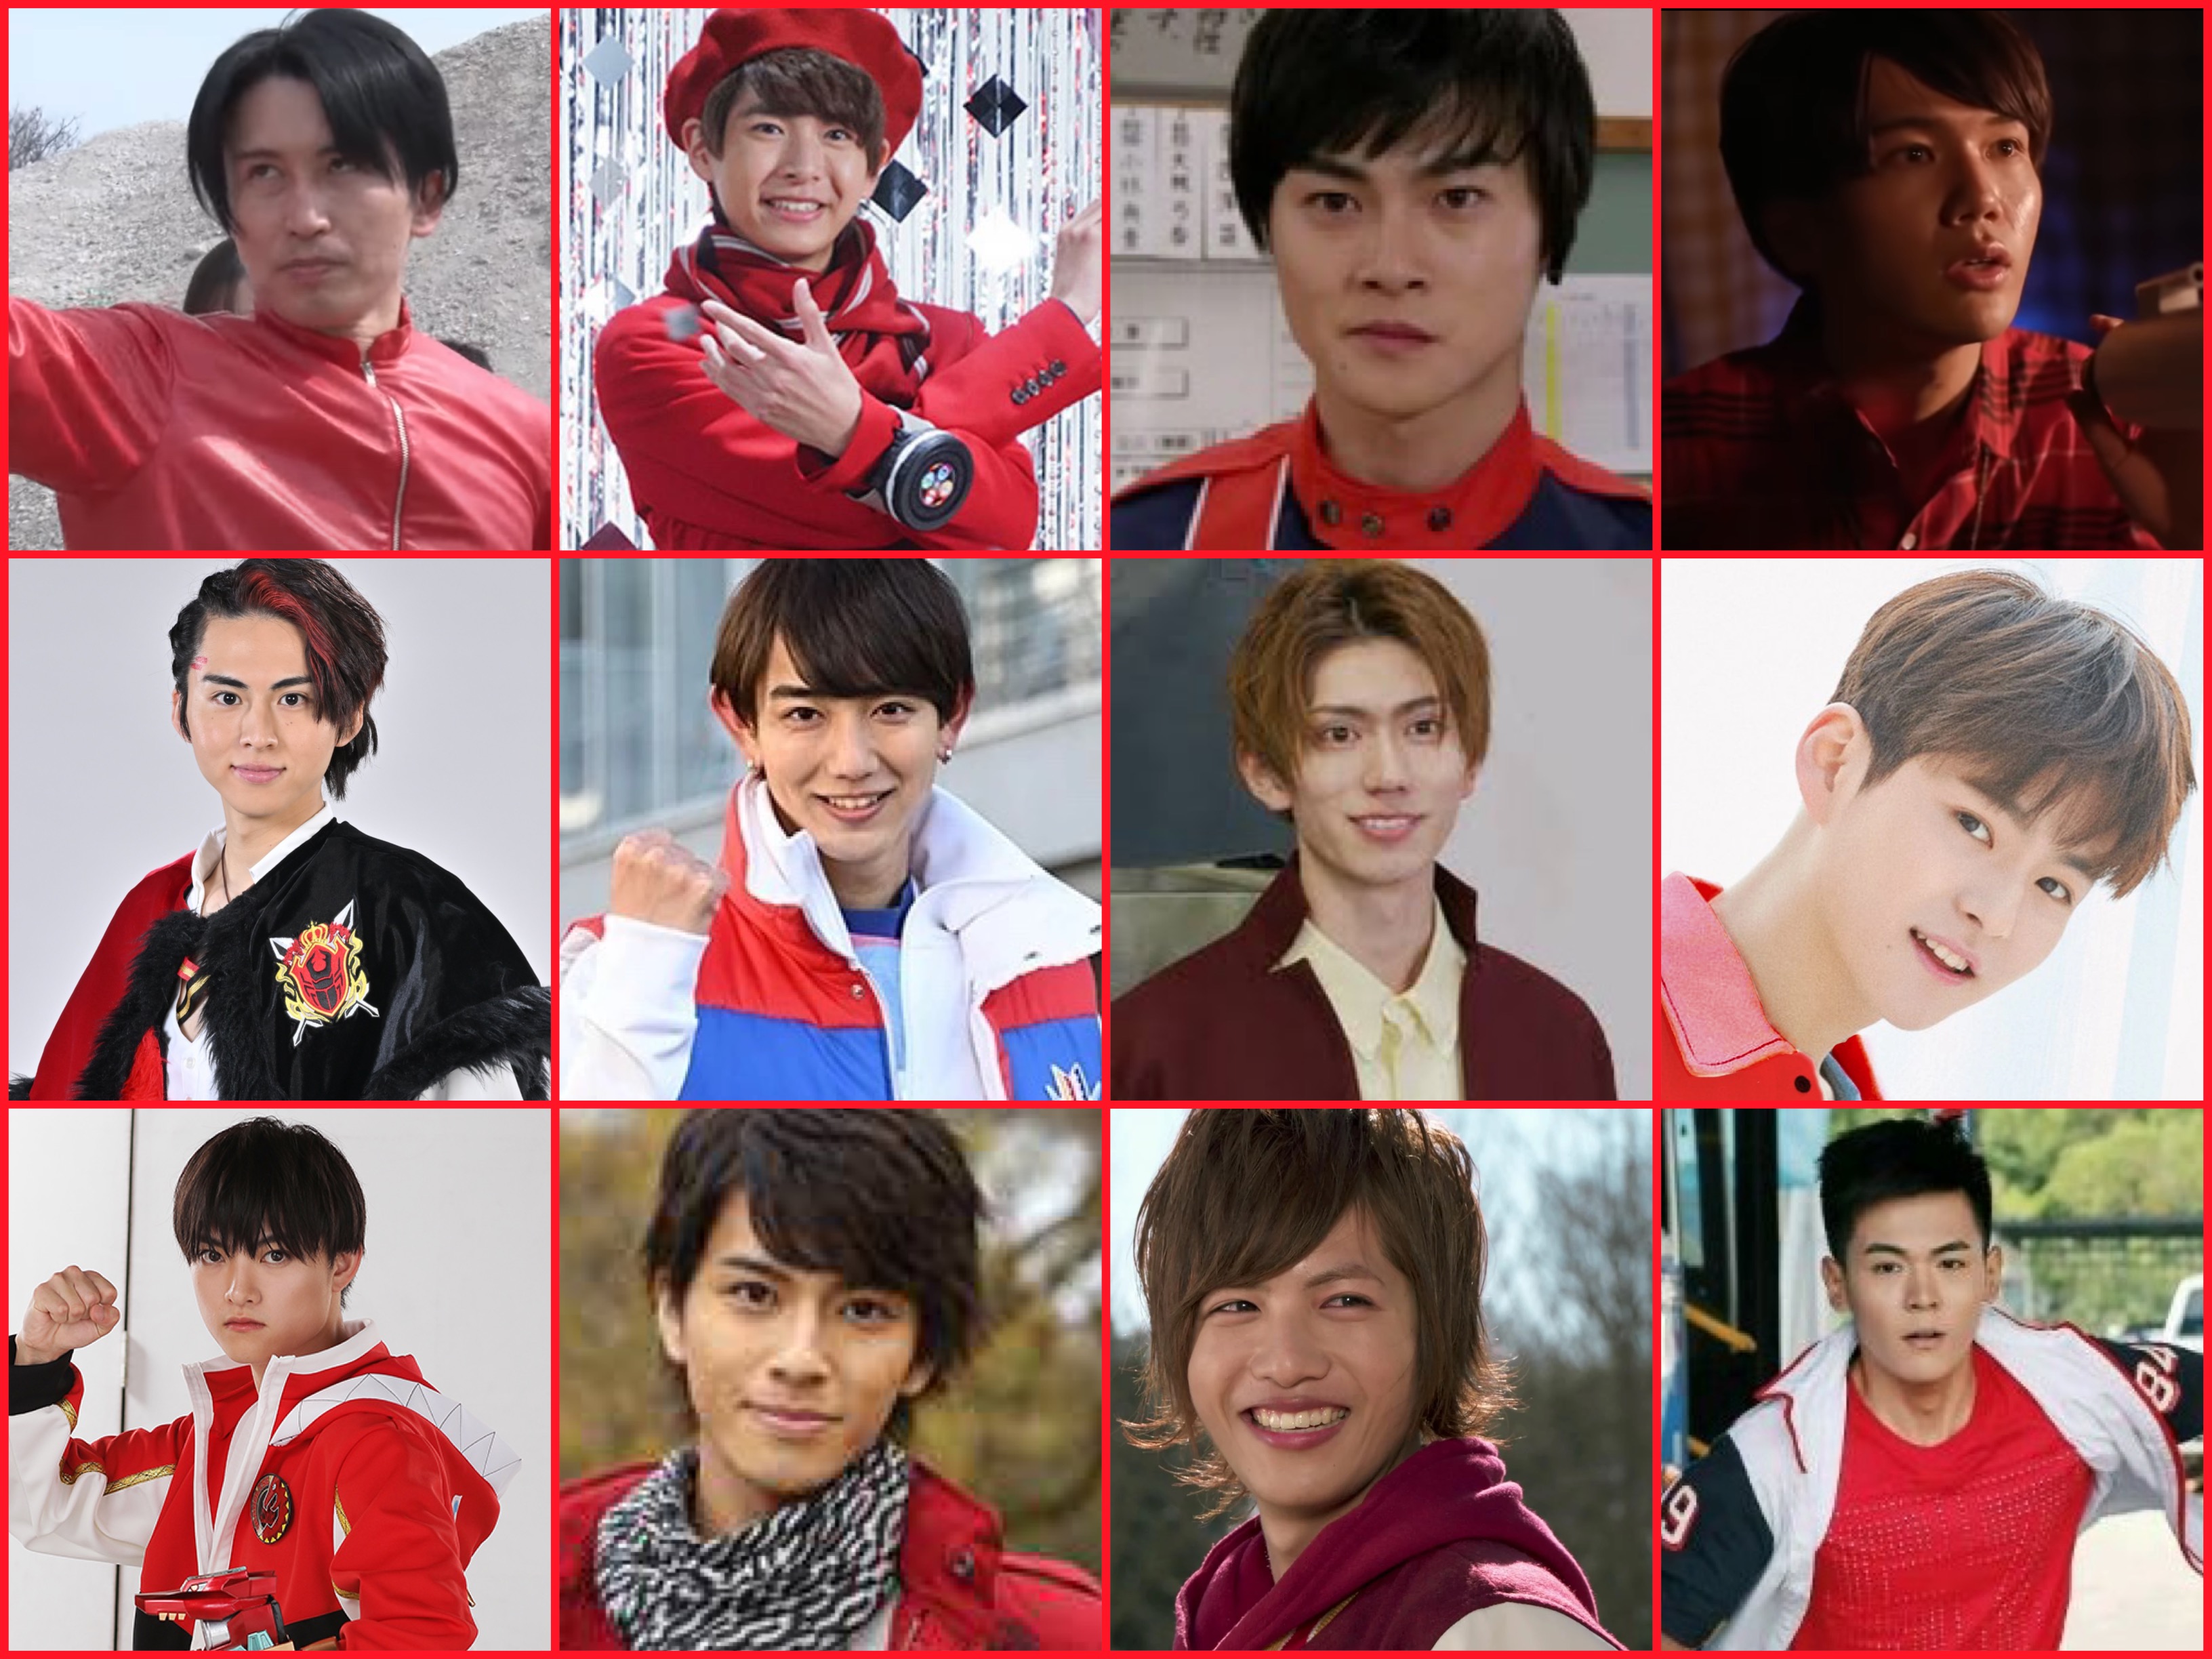 Super Sentai Cast for the possible Sentai seasons that would be the